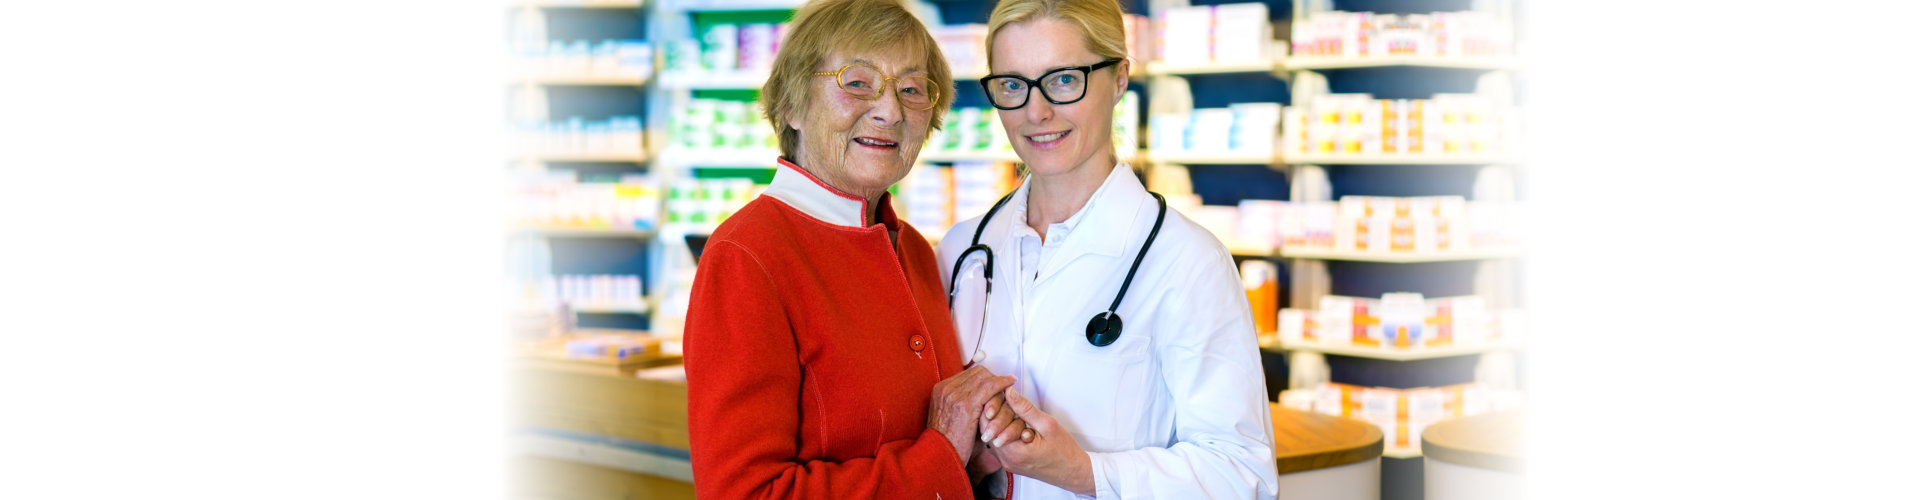 happy elderly woman holding hands with smiling female doctor